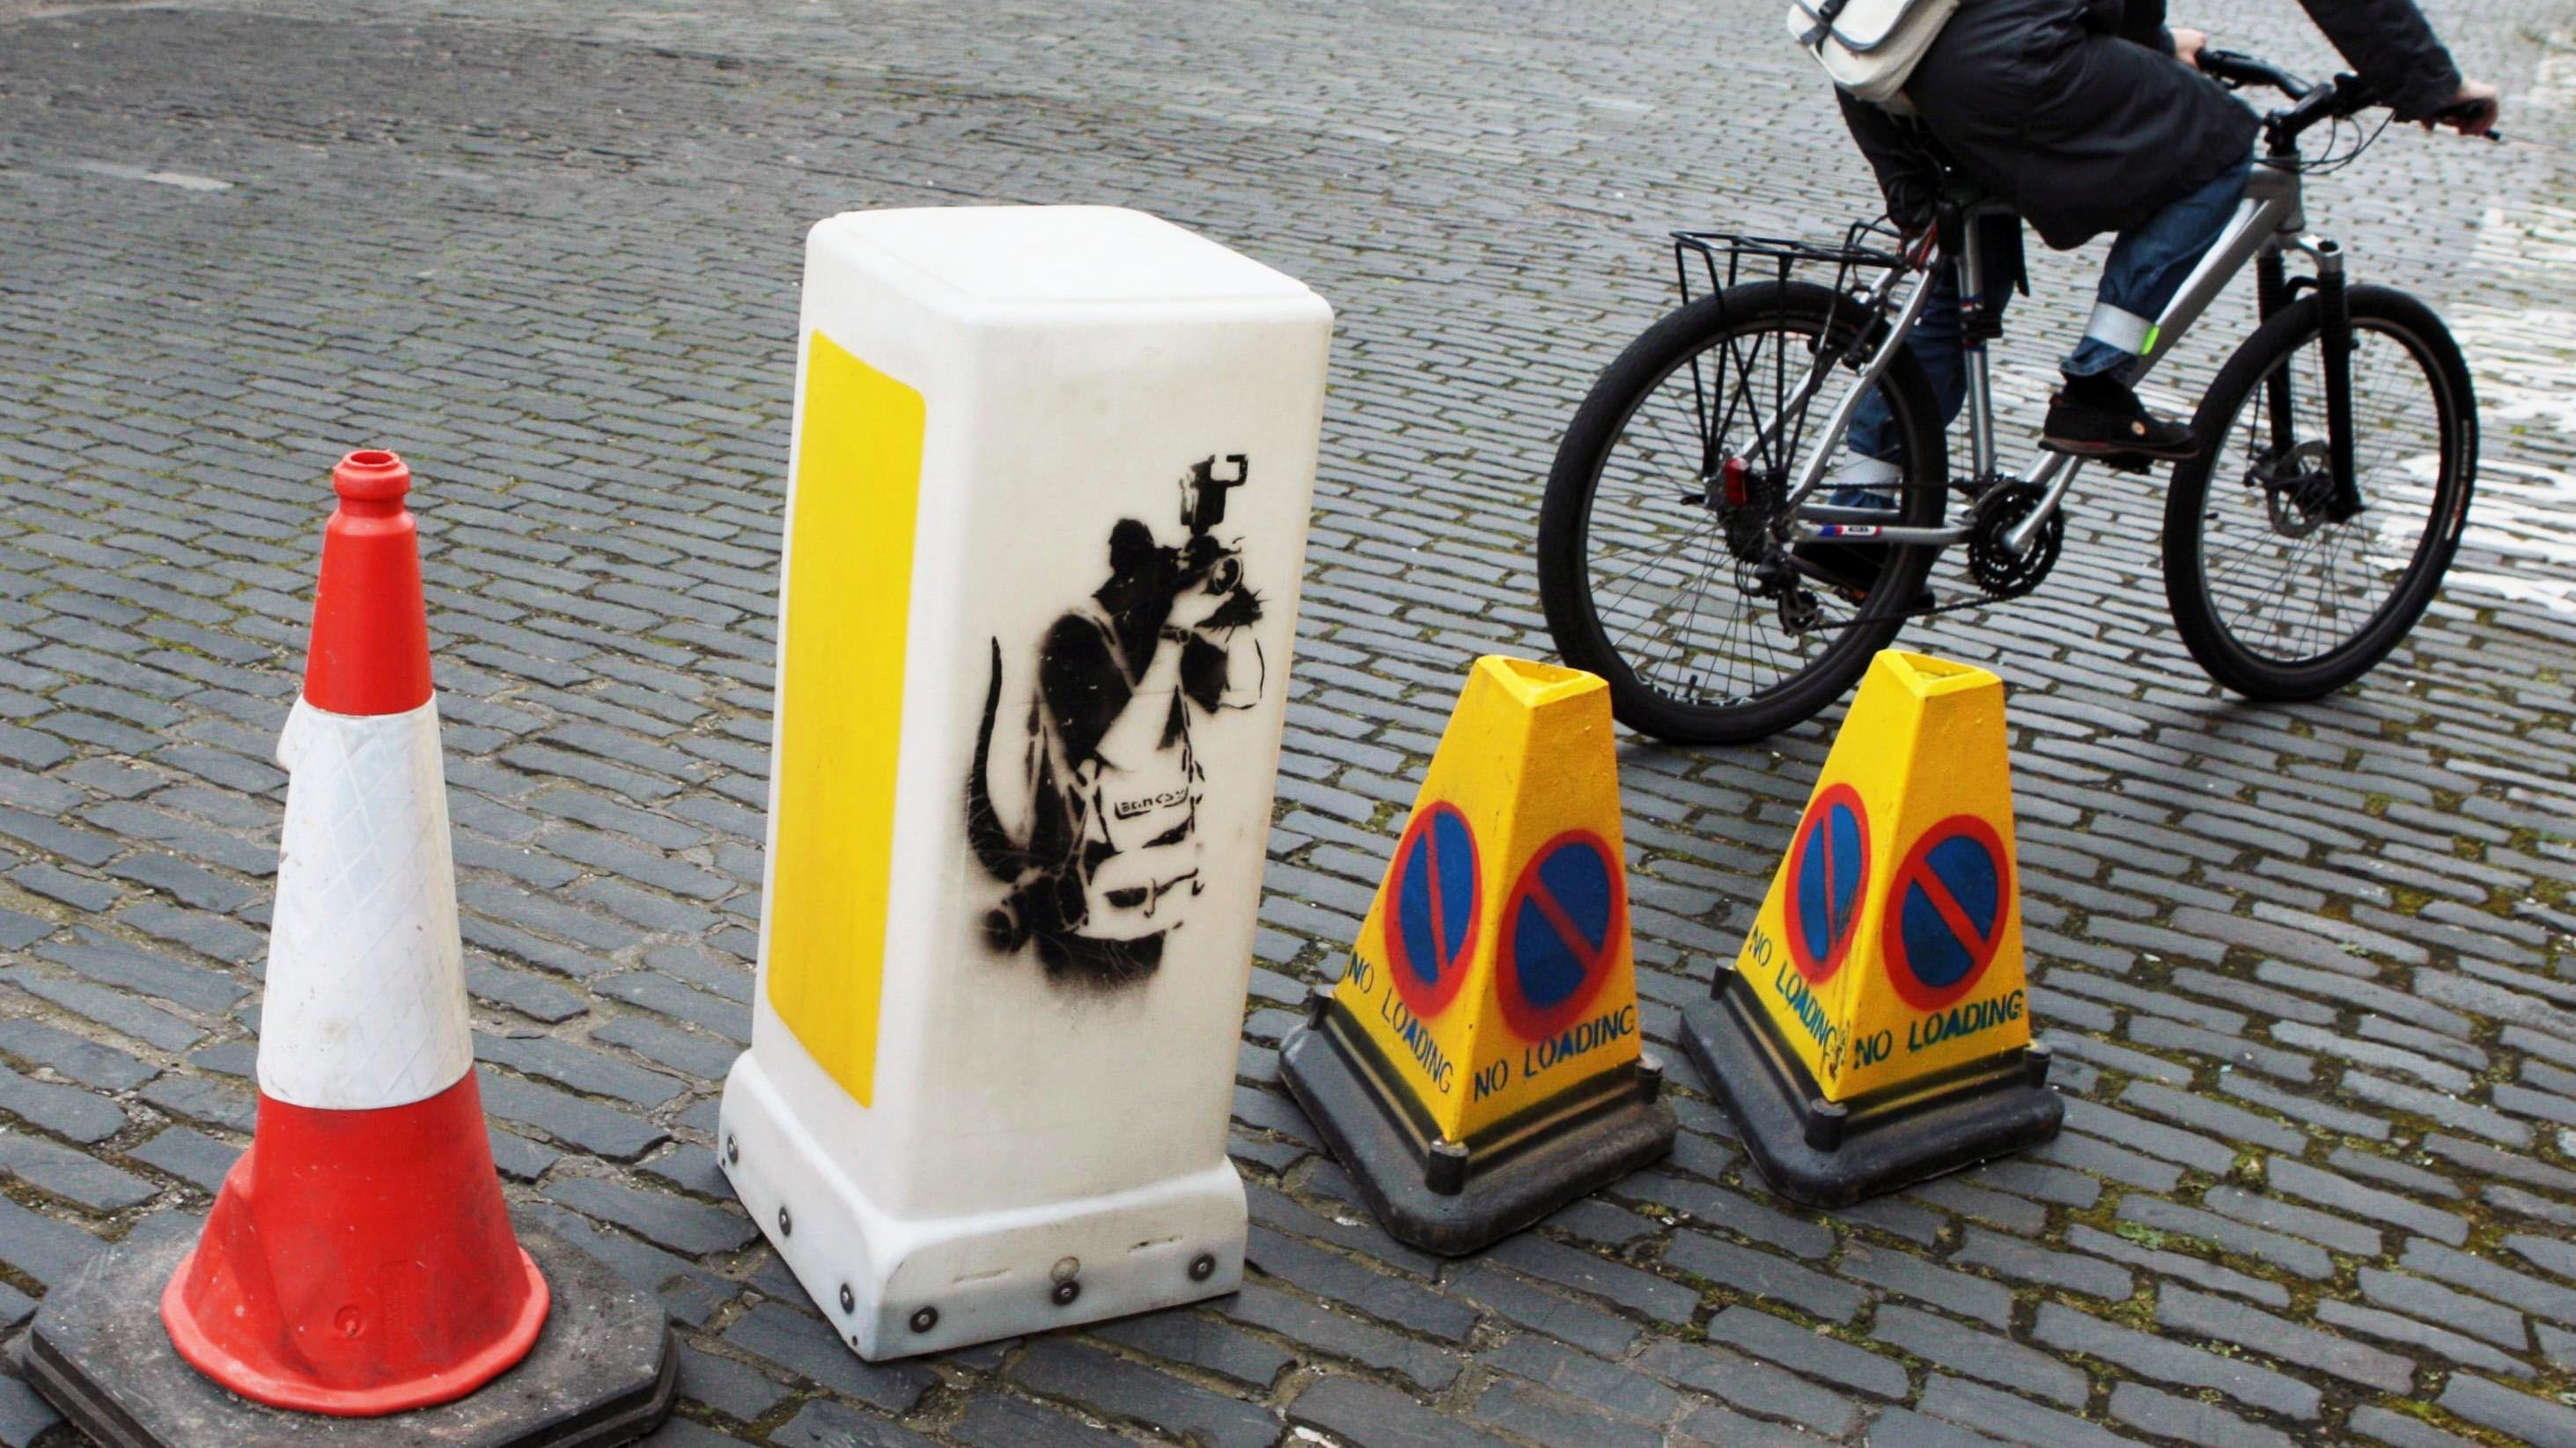 A bollard featuring one of Banksy’s rats is going under the hammer in an auction of street art